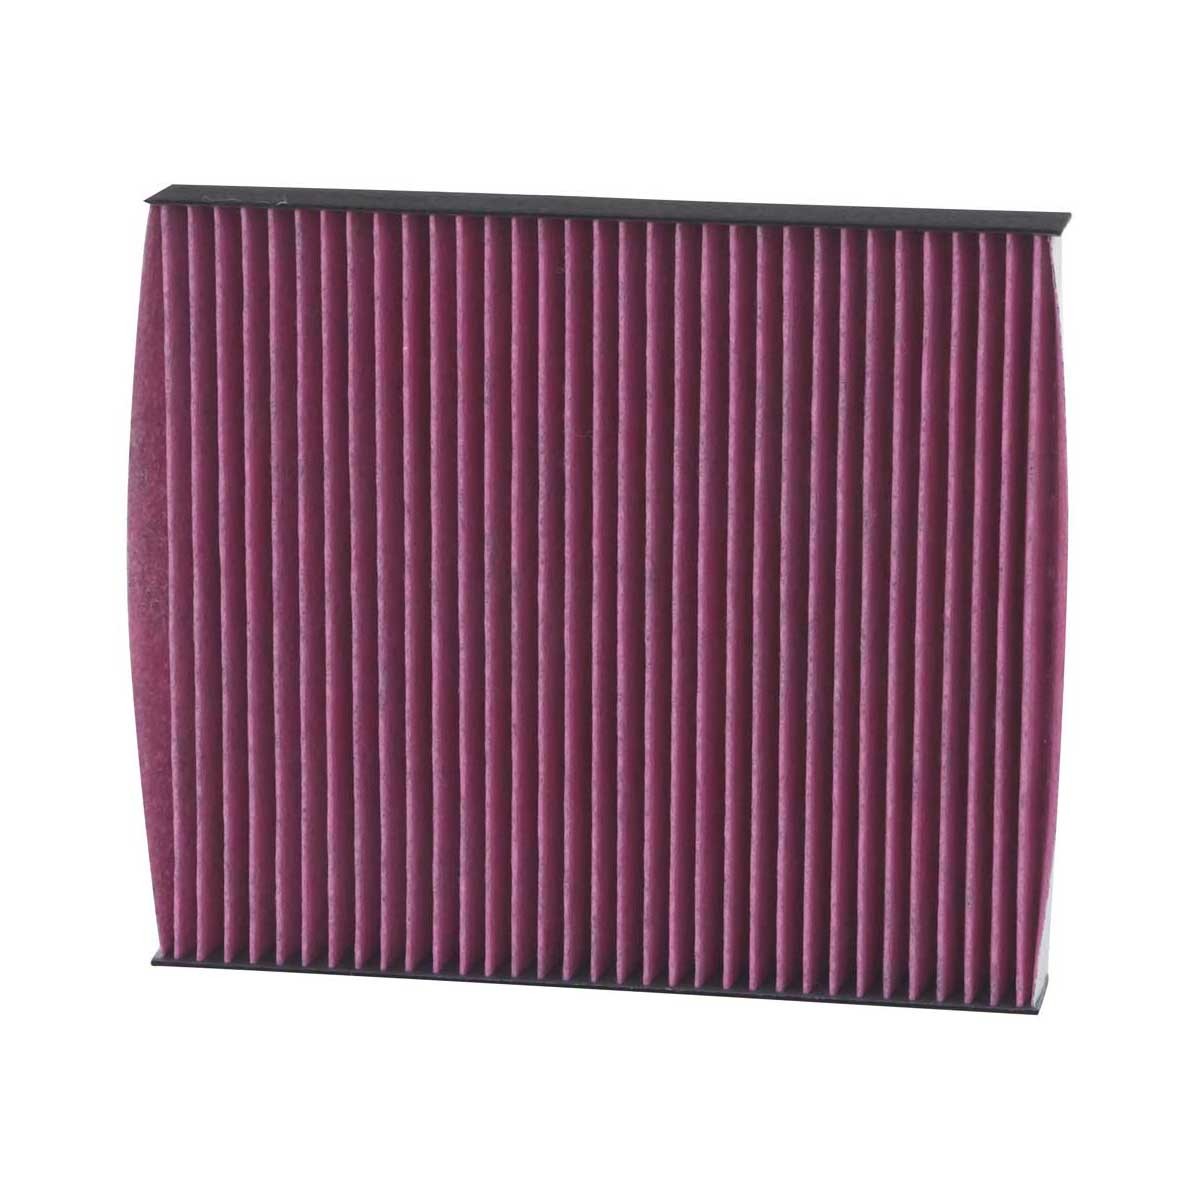 Mercedes C-Class Air conditioning filter 21502849 K&N Filters DVF5002 online buy